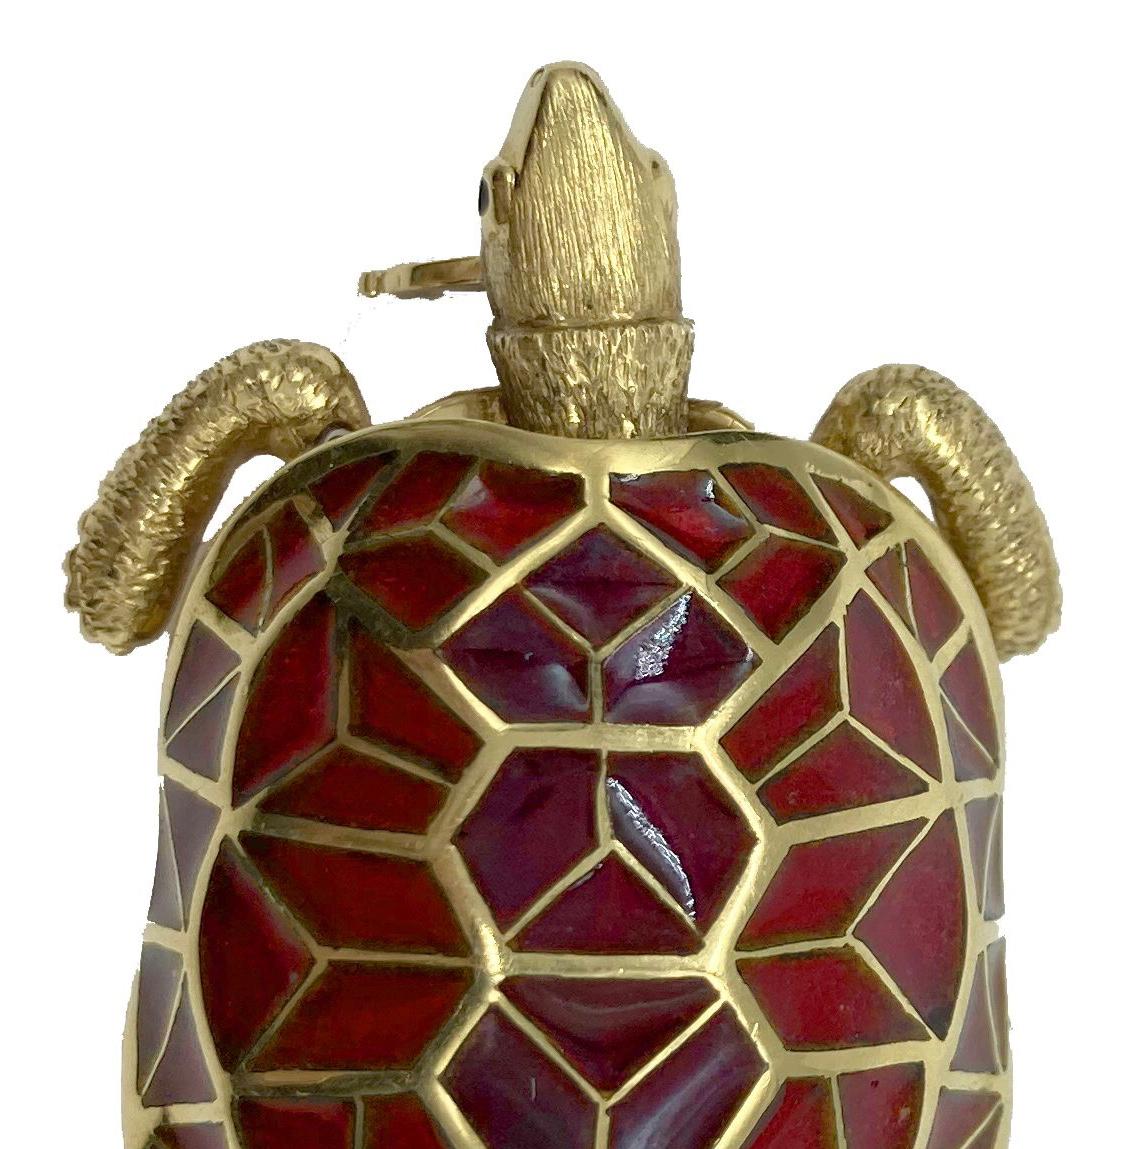 A collectible Cartier turtle brooch in 18 karat gold and hardstone.